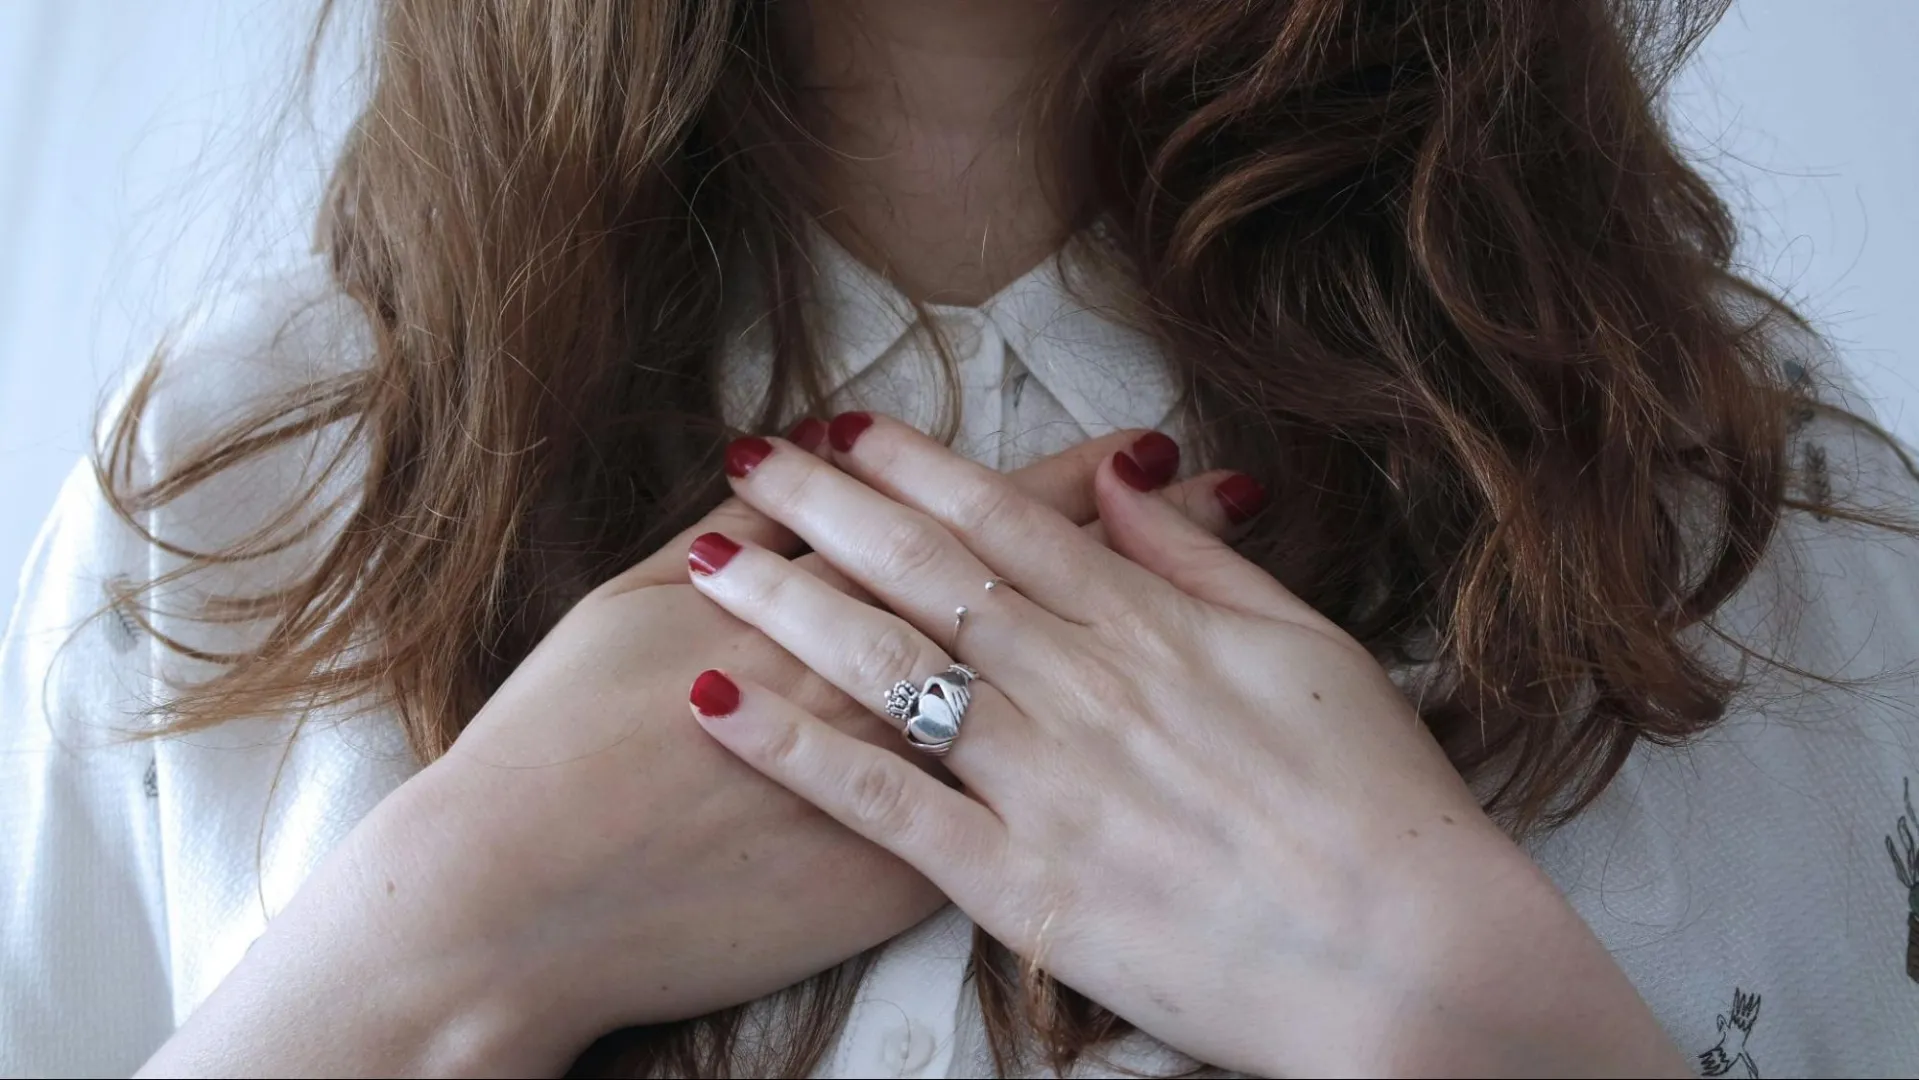 10 Popular Types of Rings and Their Meanings